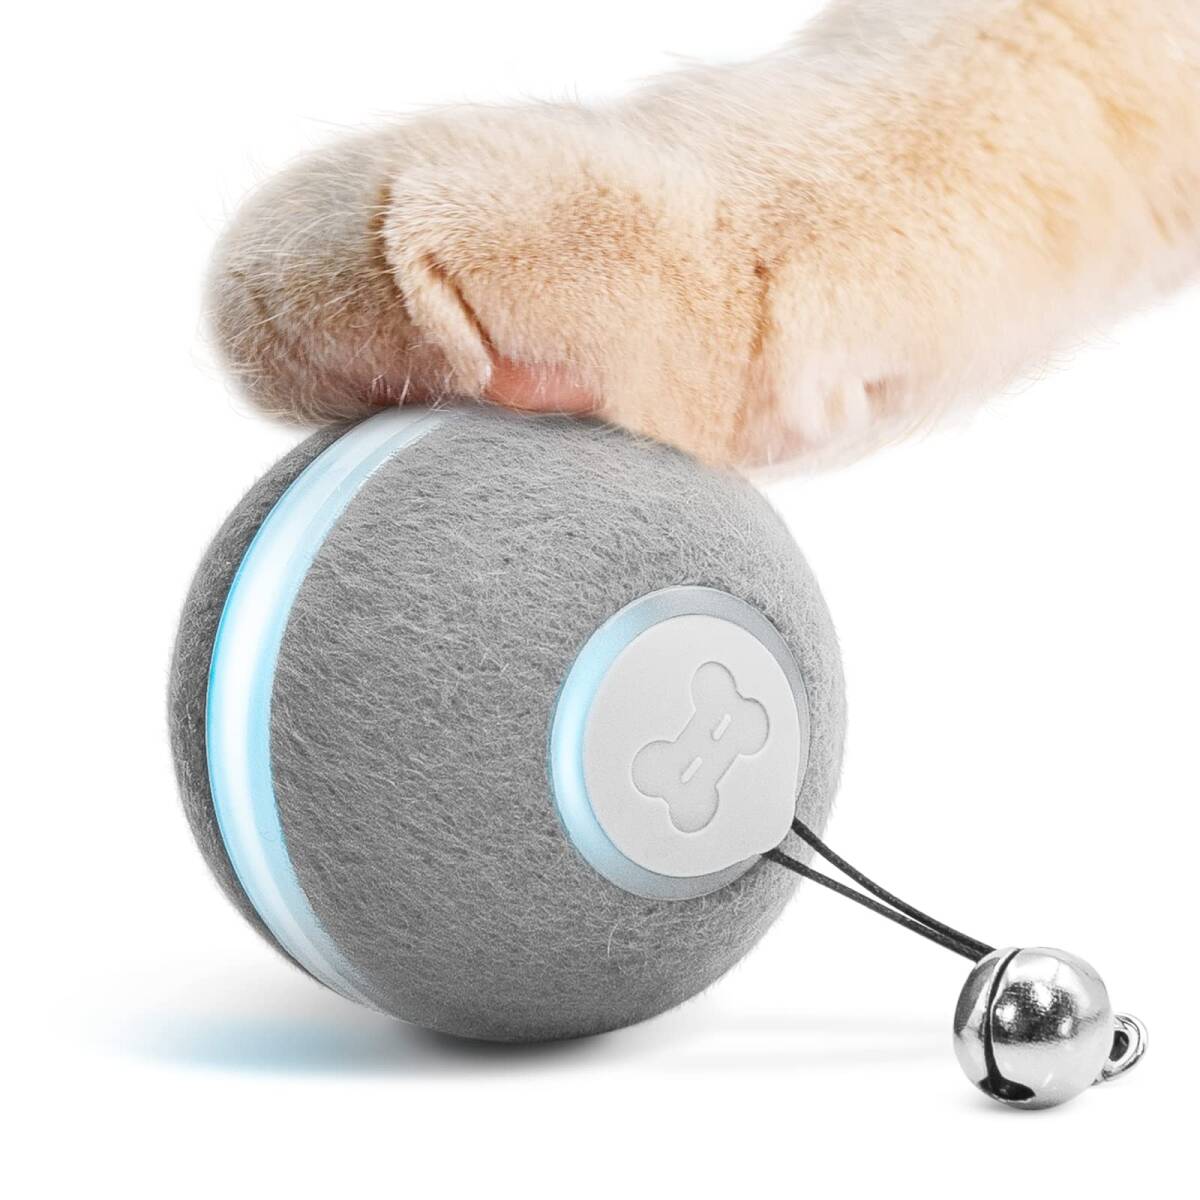  recommendation * cat toy ball durability eminent compact design 